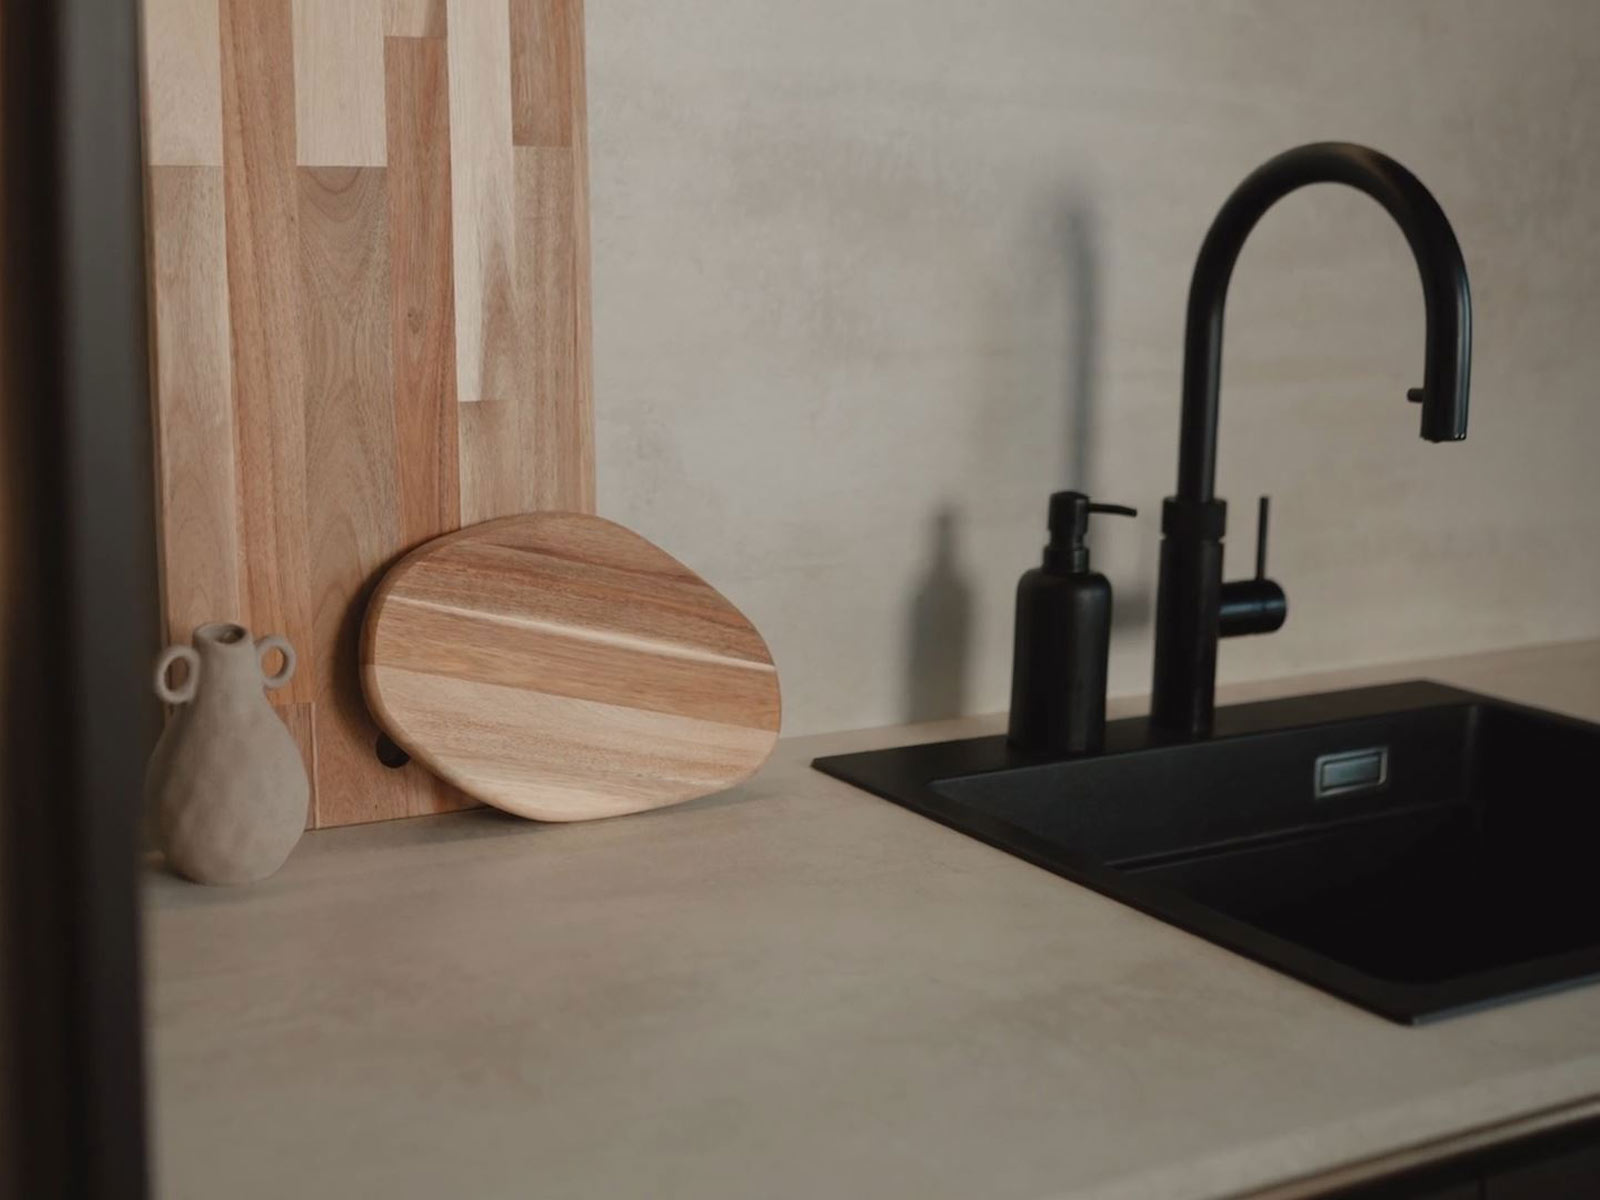 A modern kitchen worktop with a black sink and wooden chopping boards